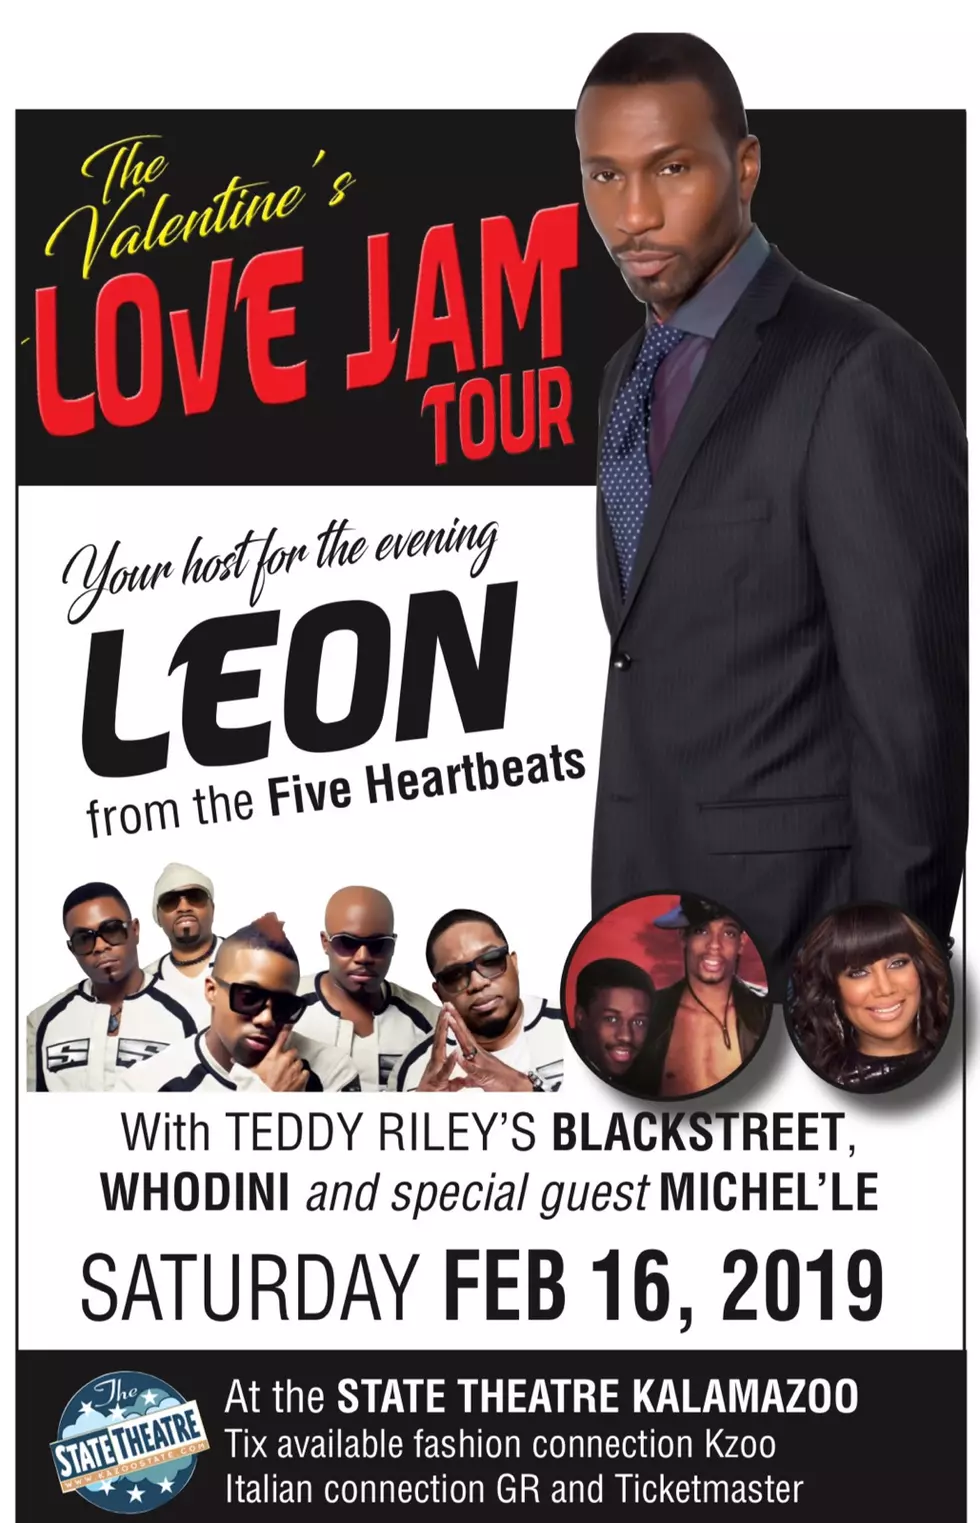 BREAKING NEWS: Actor Leon will host the Valentine&#8217;s Day Love Jam Tour